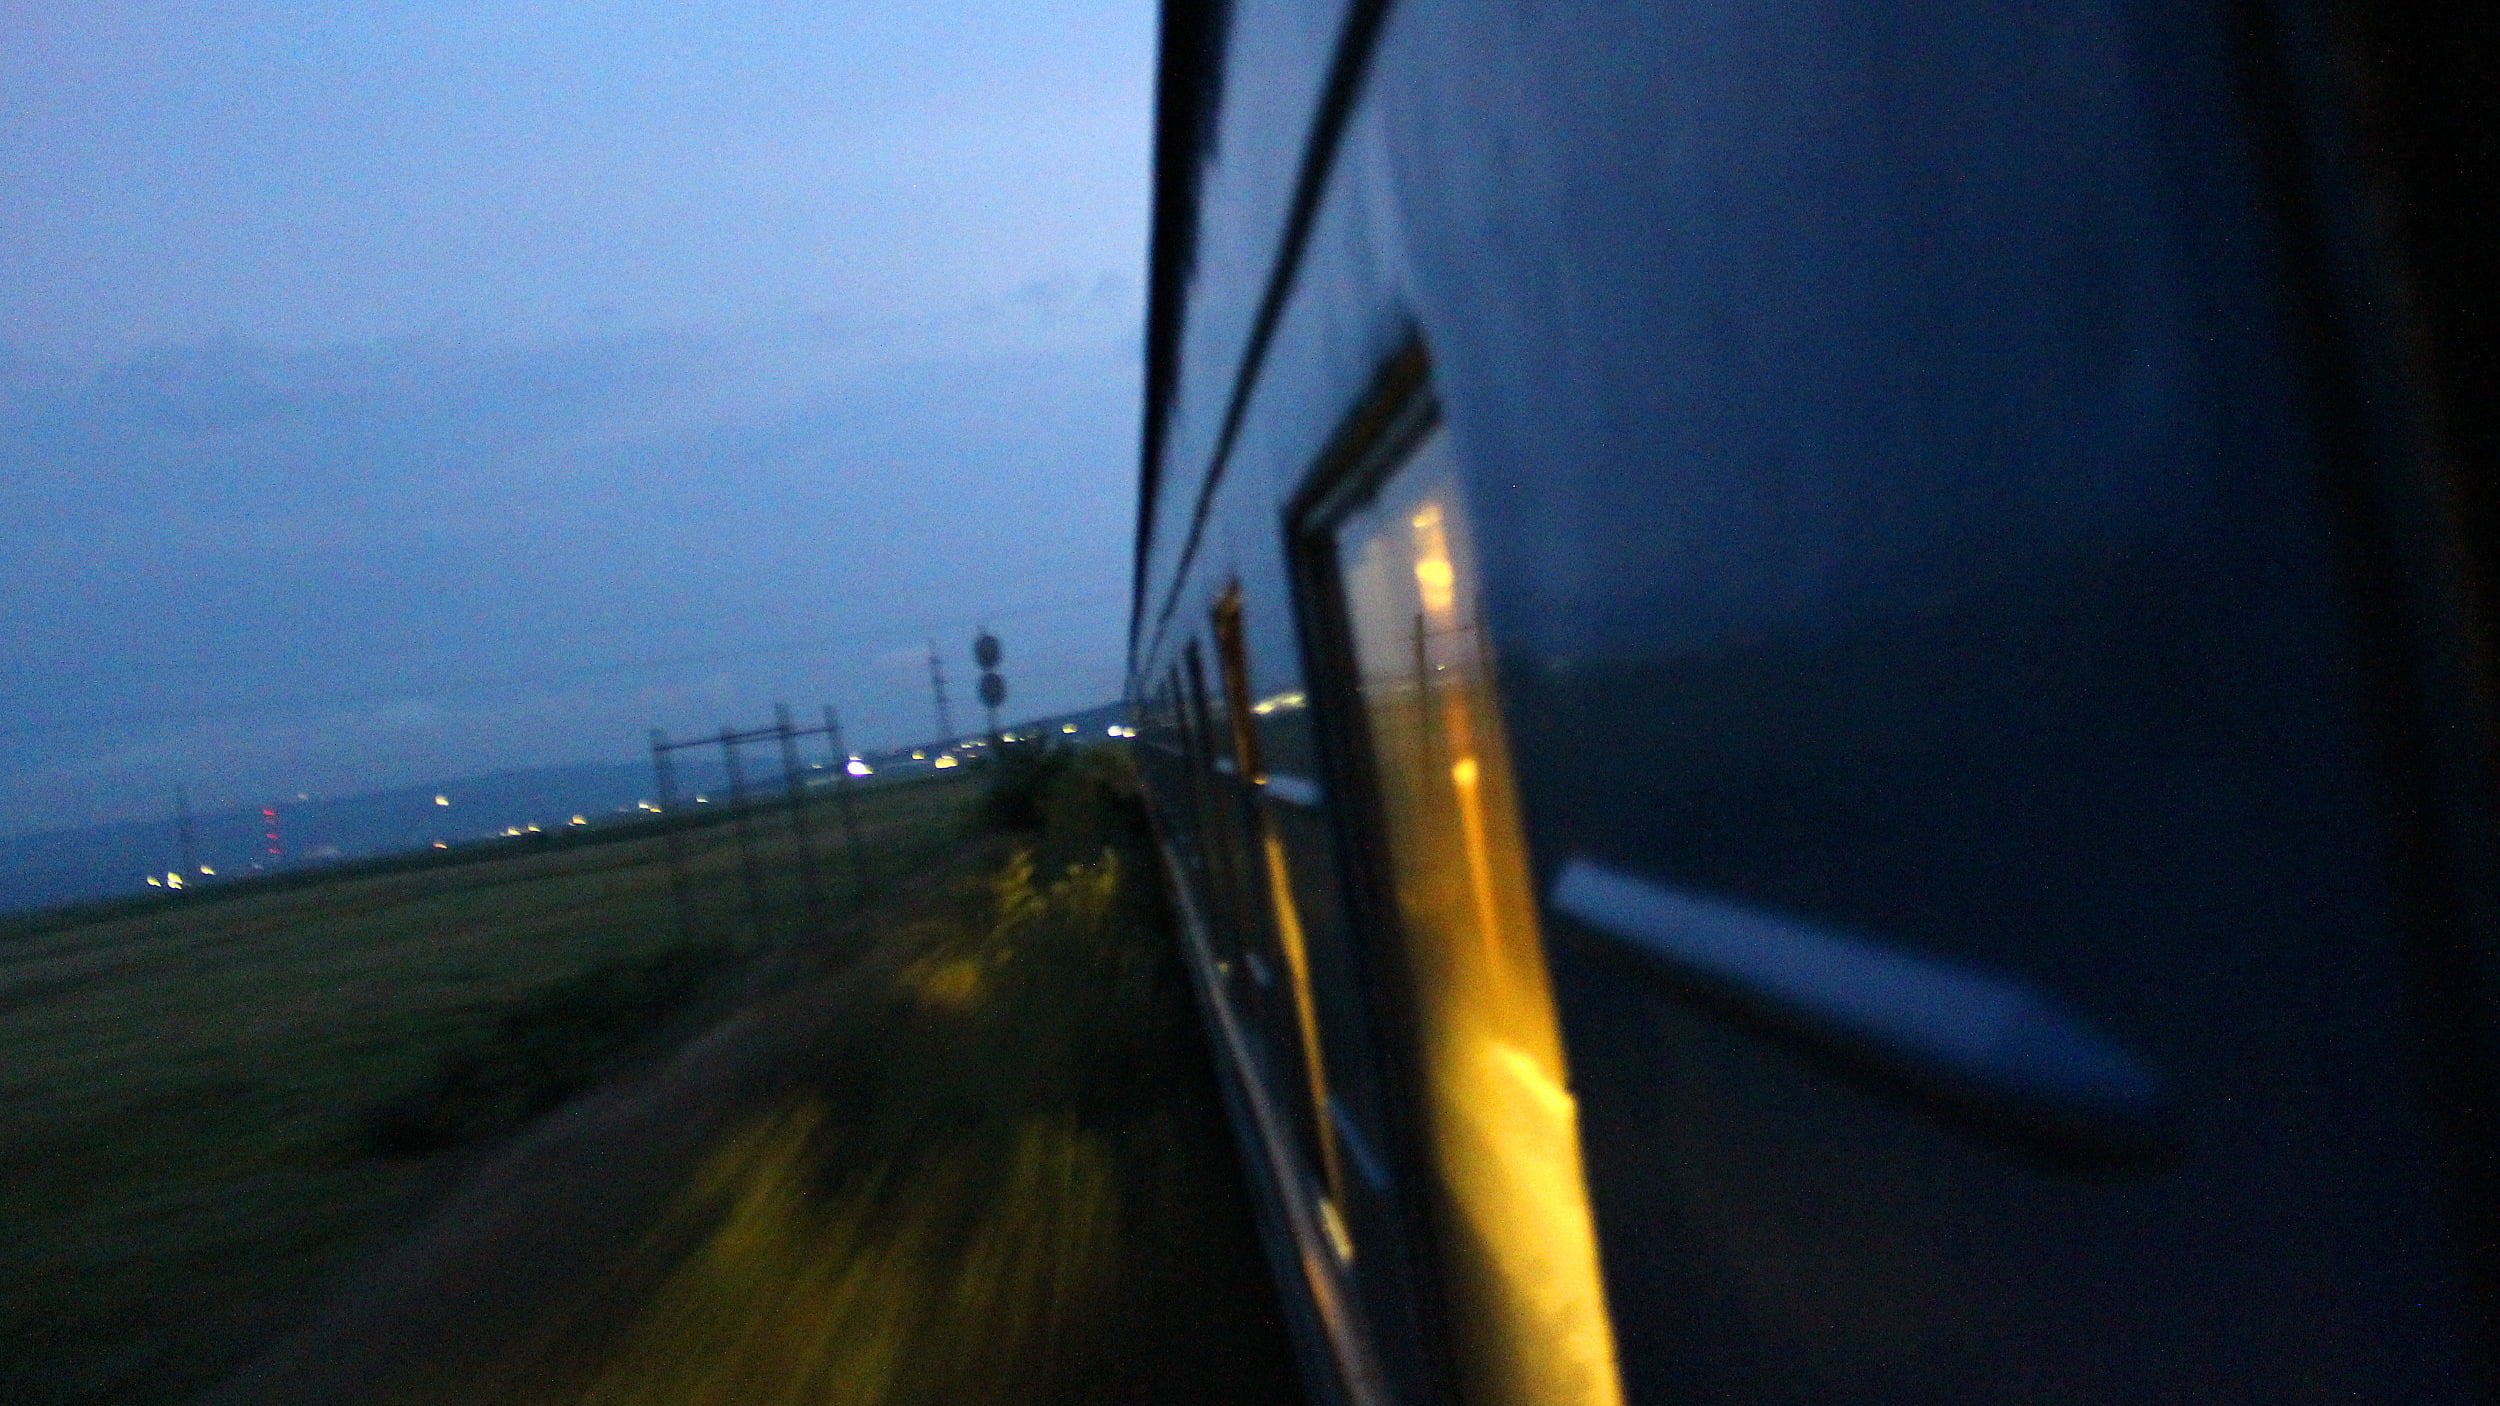 A night shot from the window of a train in Eastern Europe.